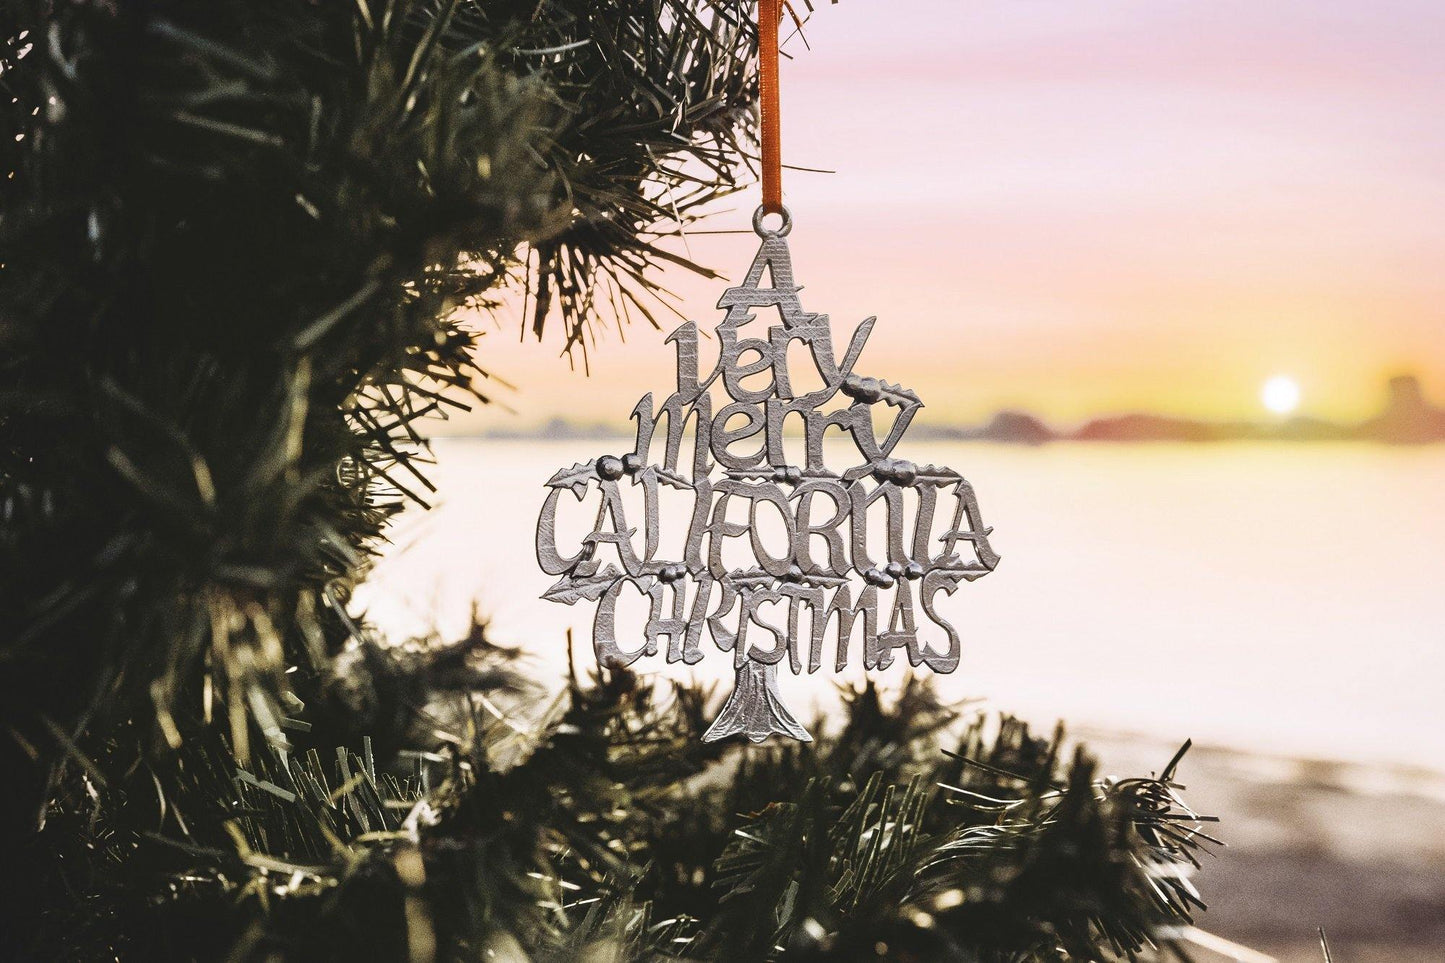 A Very Merry California CA Christmas Ornament Holiday Keepsake Pewter - House of Morgan Pewter